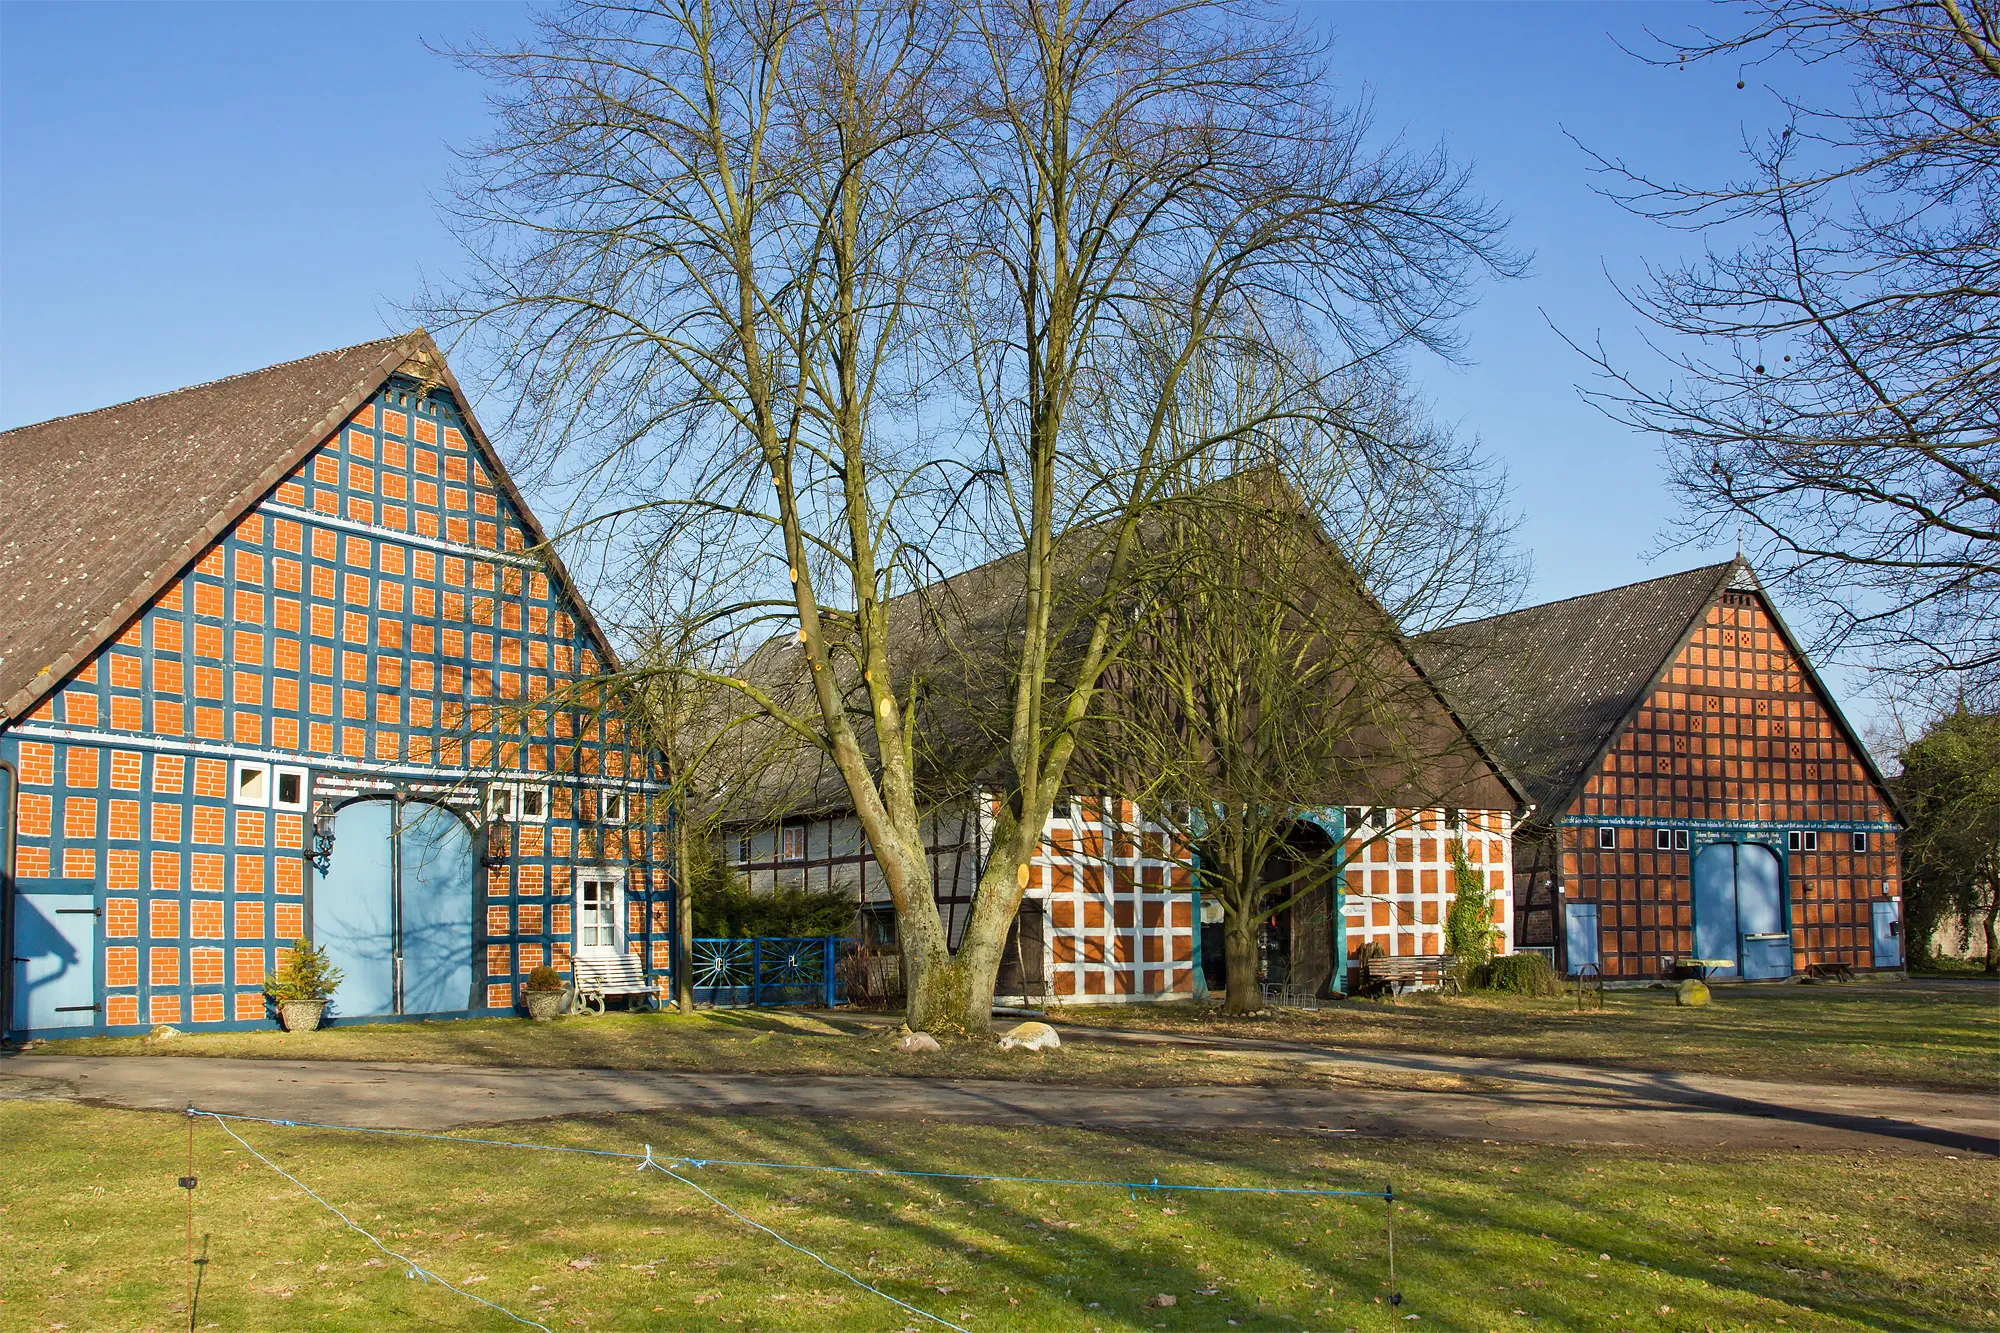 Photo showing: Part of the village Güstritz (district Lüchow-Dannenberg, northern Germany) with typical local form of settlement, called "rundling".